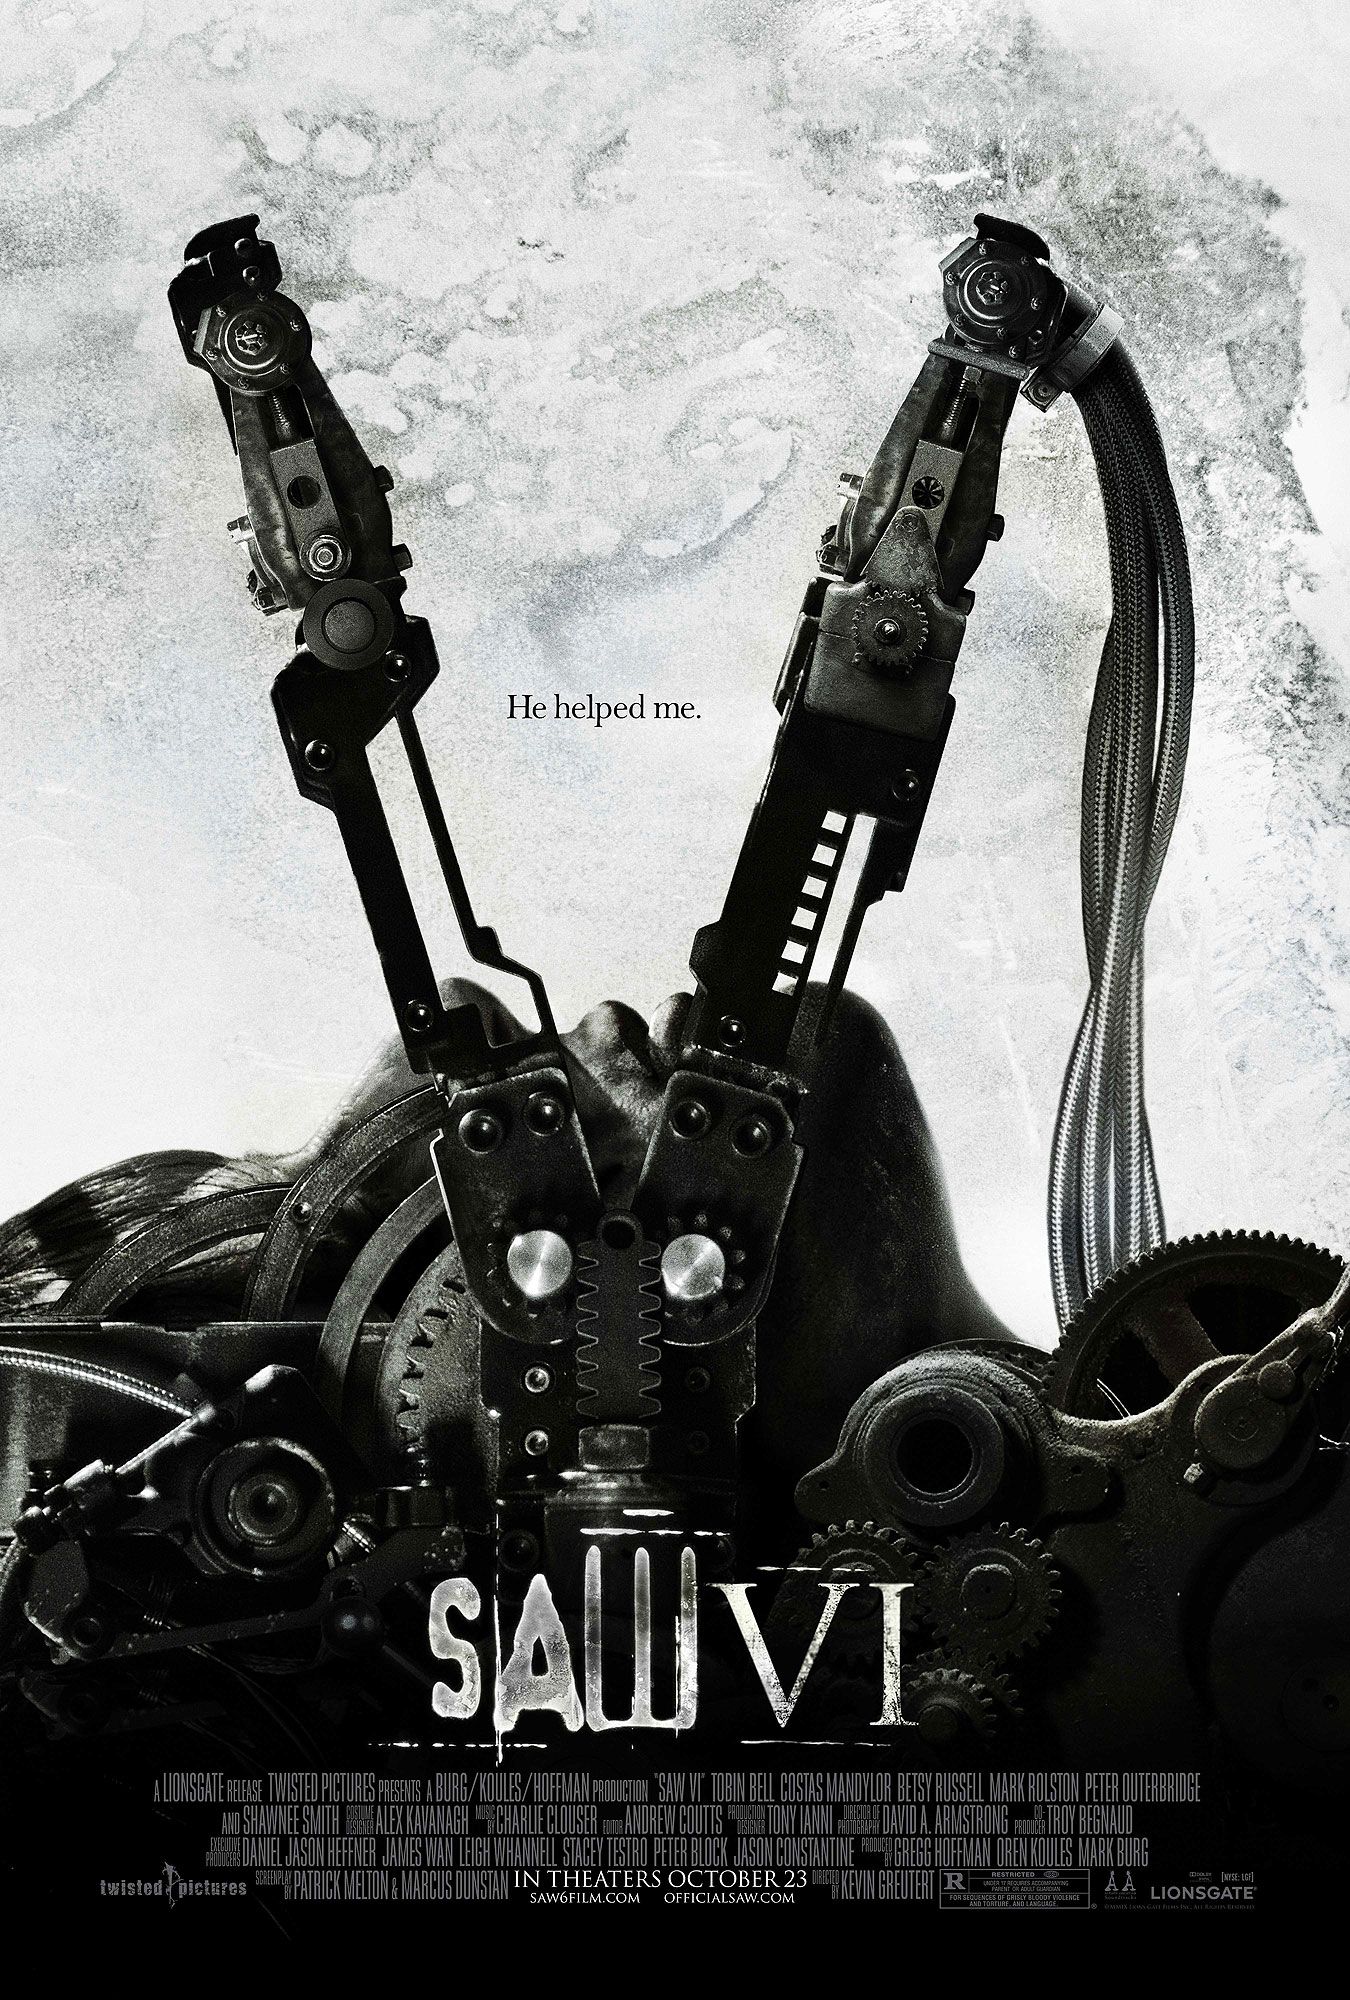 Saw VI{6} will continue the Halloween tradition of Jigsaw in theaters on October 23 and you just know we have to celebrate the latest installment of this classic horror franchise. We have a brand new contest running and we're giving away such prizes as womens and mens t-shirts, nurse one-sheet posters, final one-sheet posters, teaser glove posters and teaser Bullz-Eye posters. You know these prizes will surely go fast, so play out little game and enter this contest today!